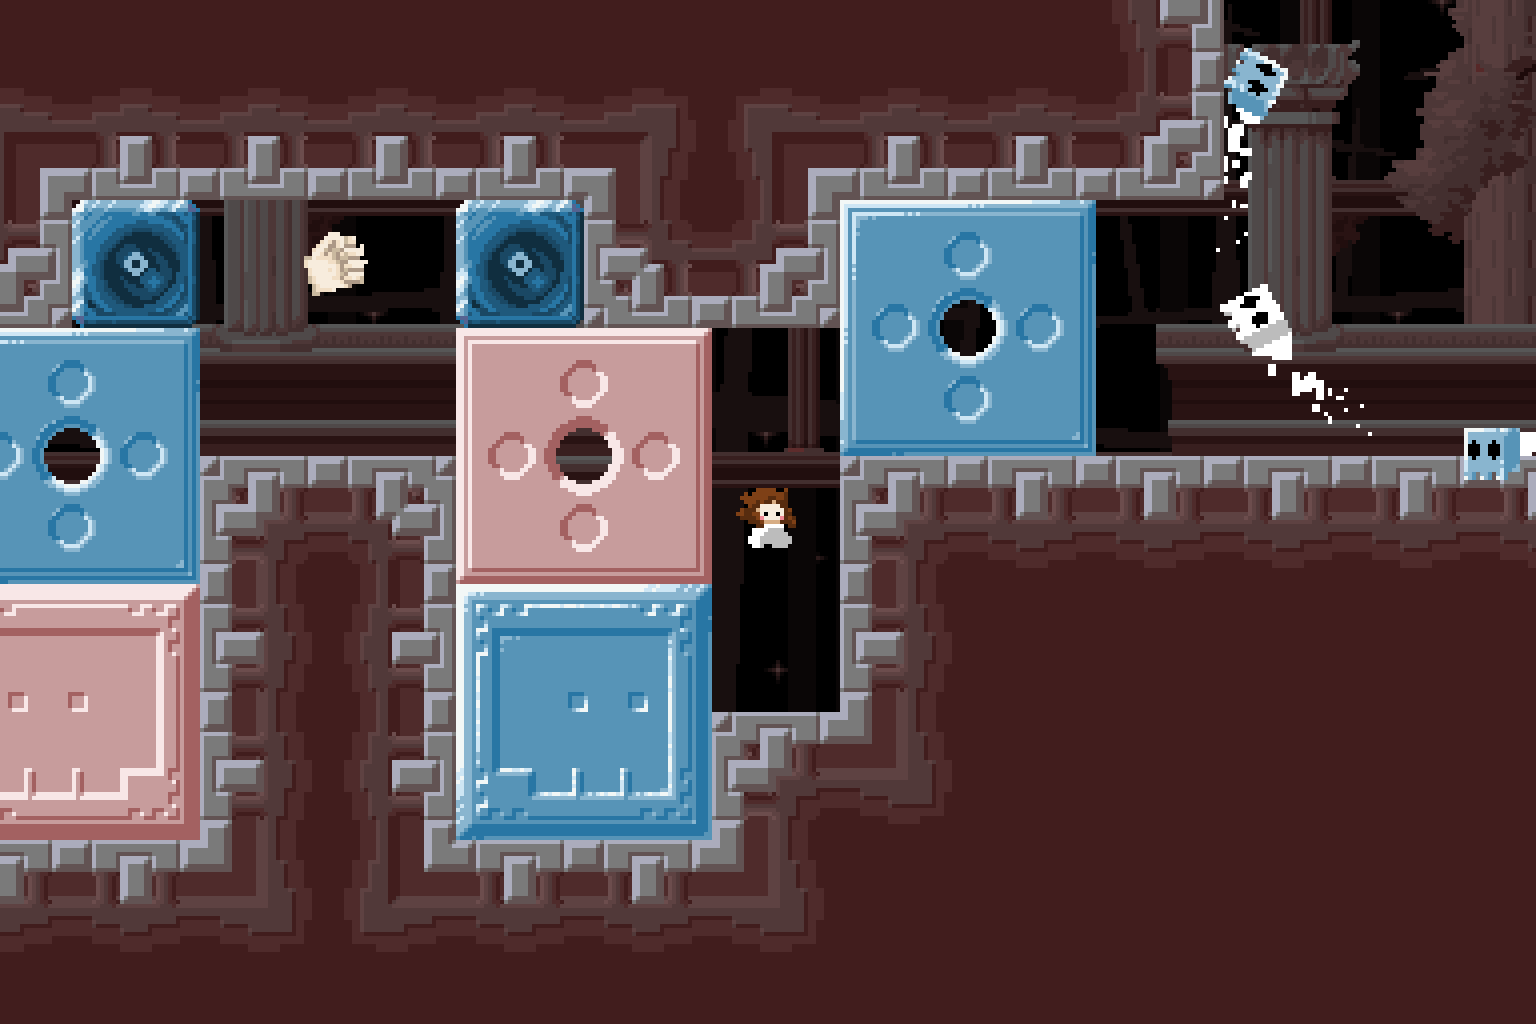 screenshot: Vivi is inside some mysterious catacombs. Pink and blue blocks are decorated with holes and skulls, while off to the right of the screen a series of floating skulls move in a circle.